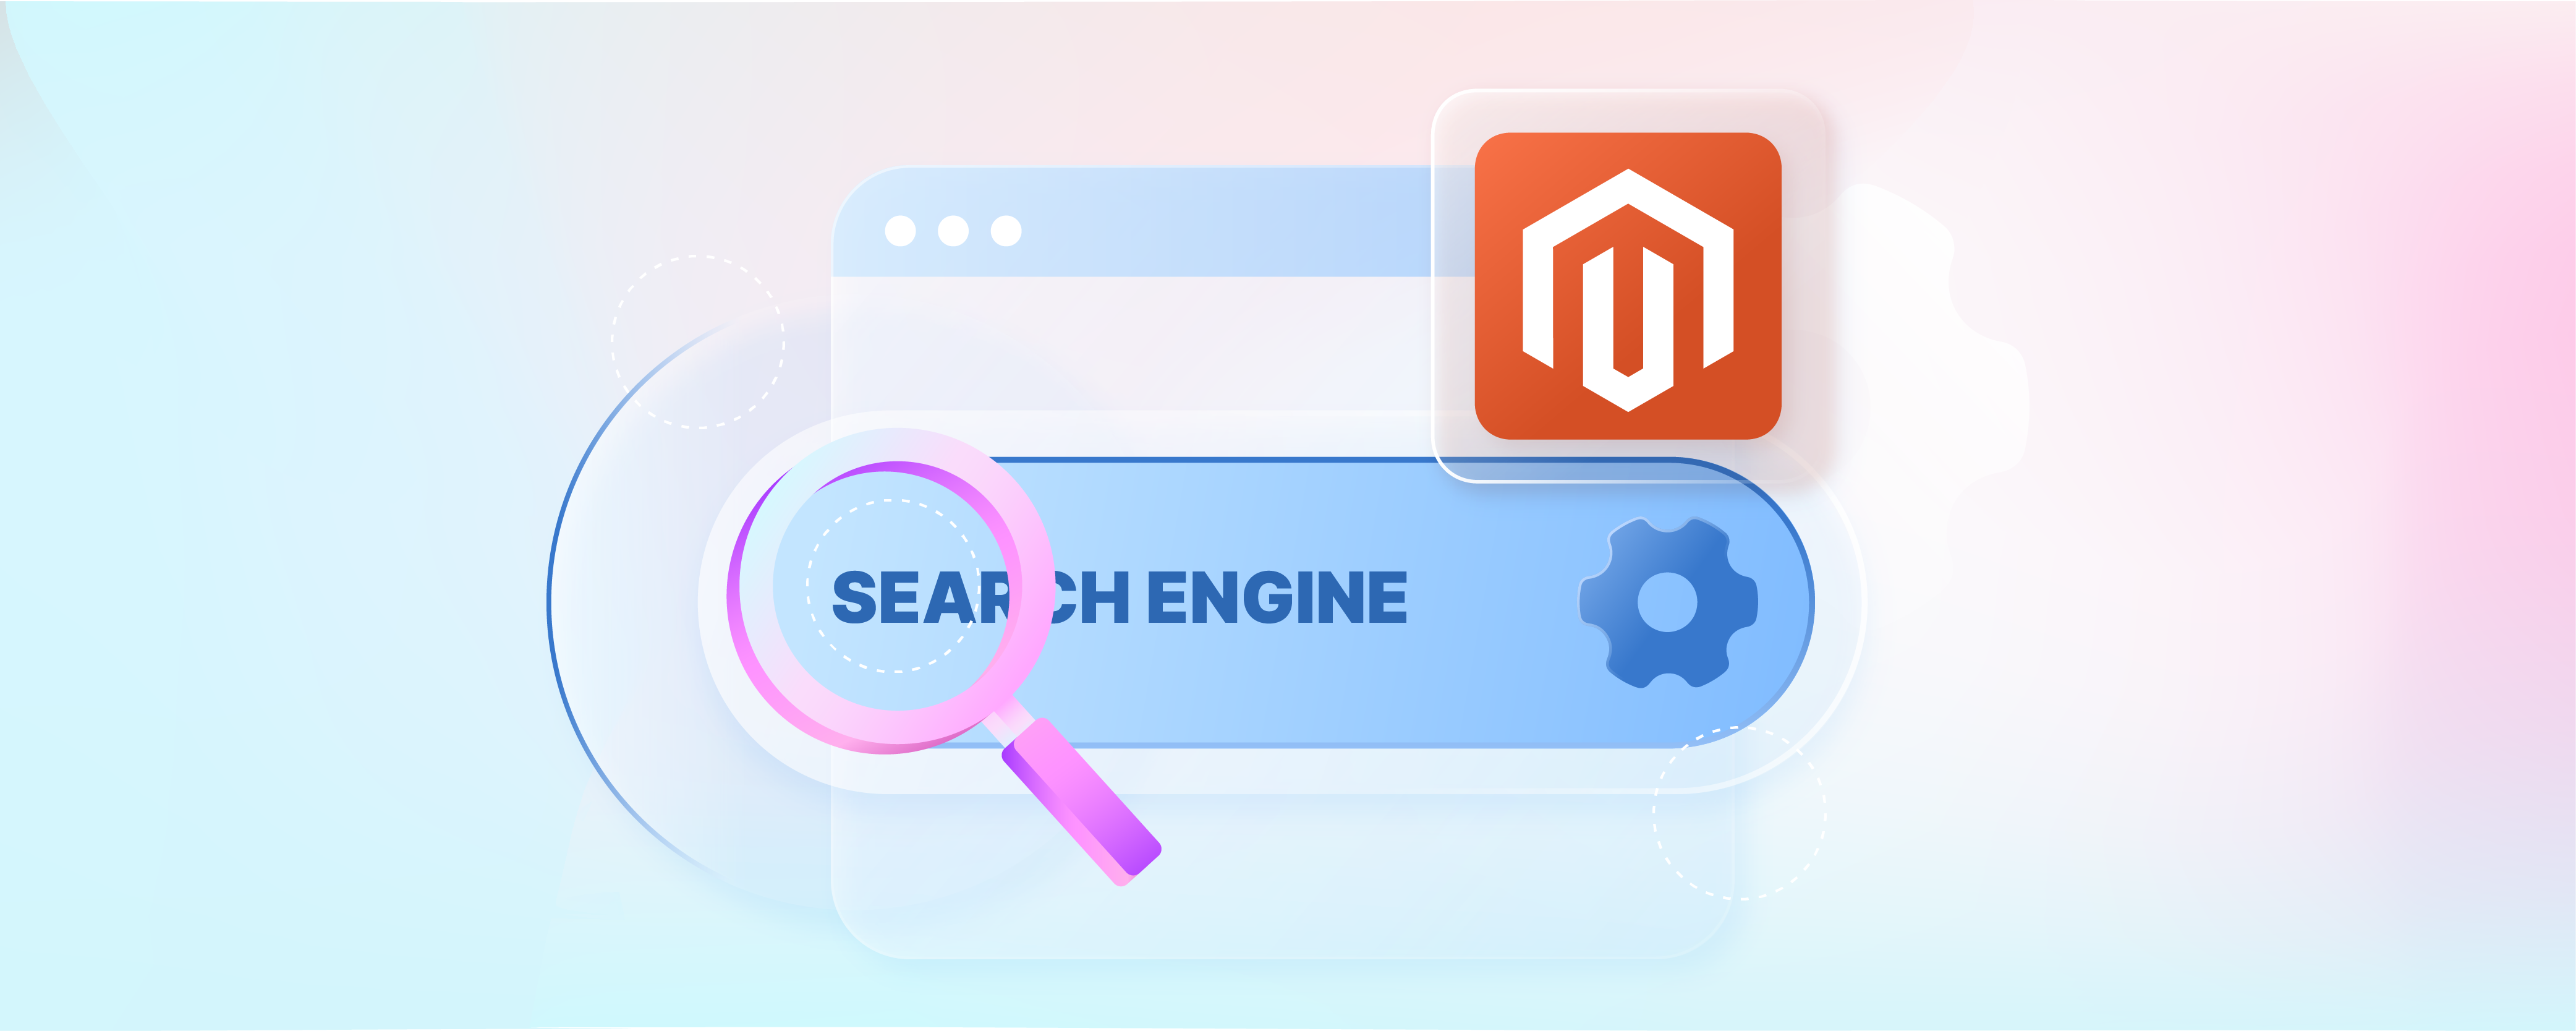 How to Configure Magento Search Engine?